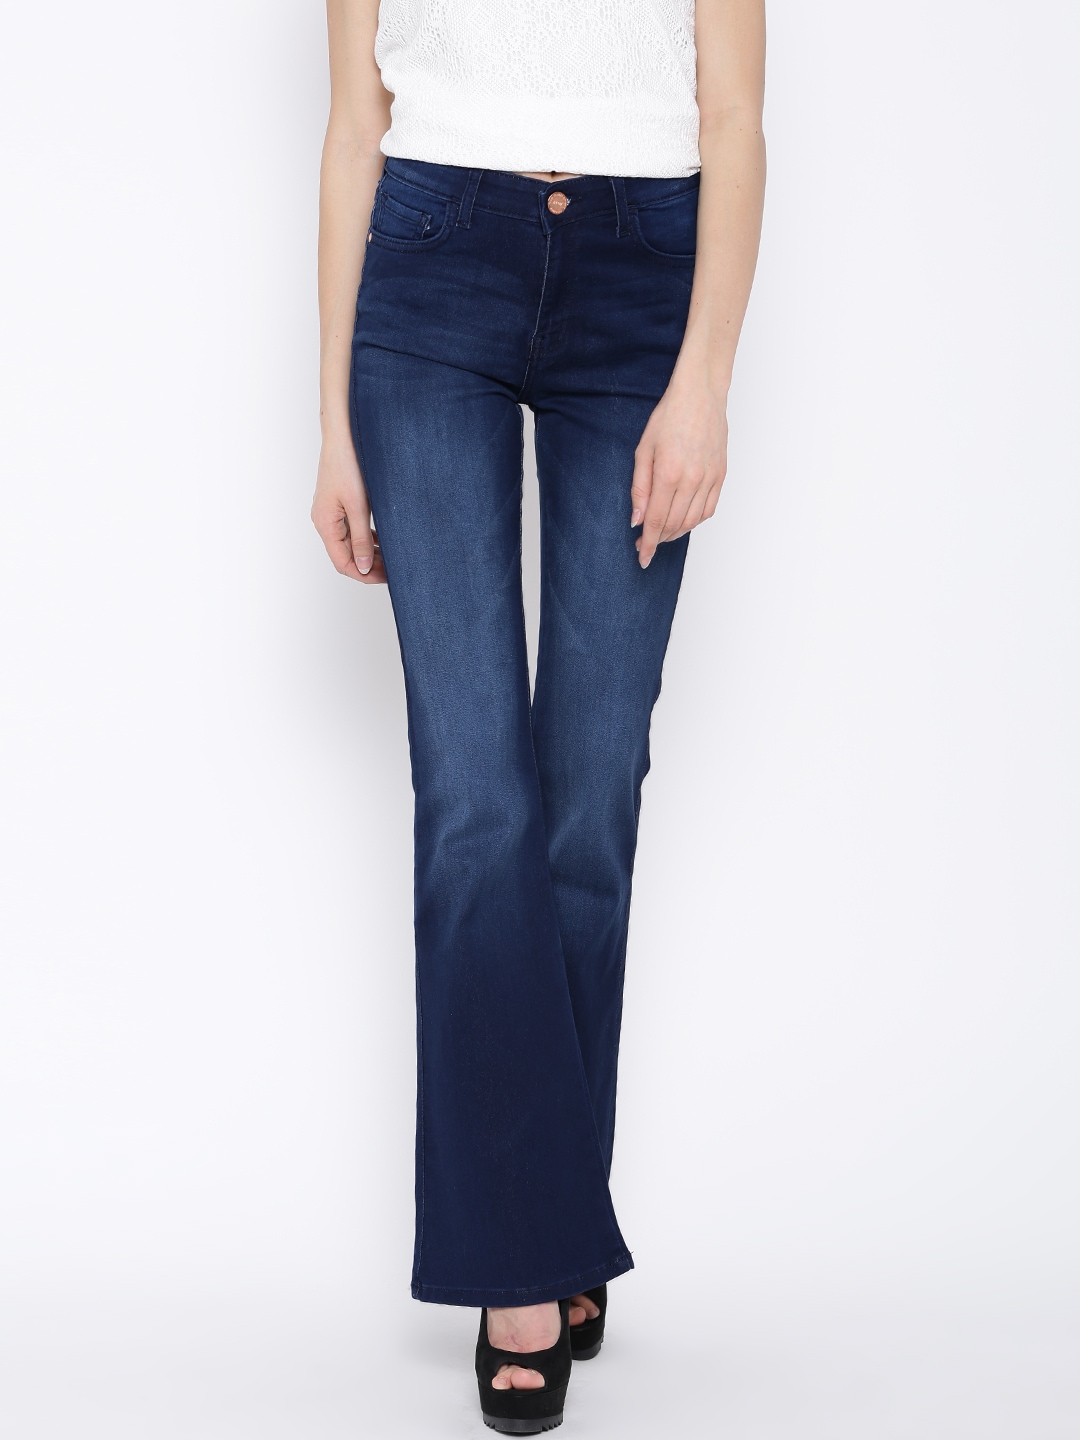 Buy Bootcut Jeans Online India - Jeans Am